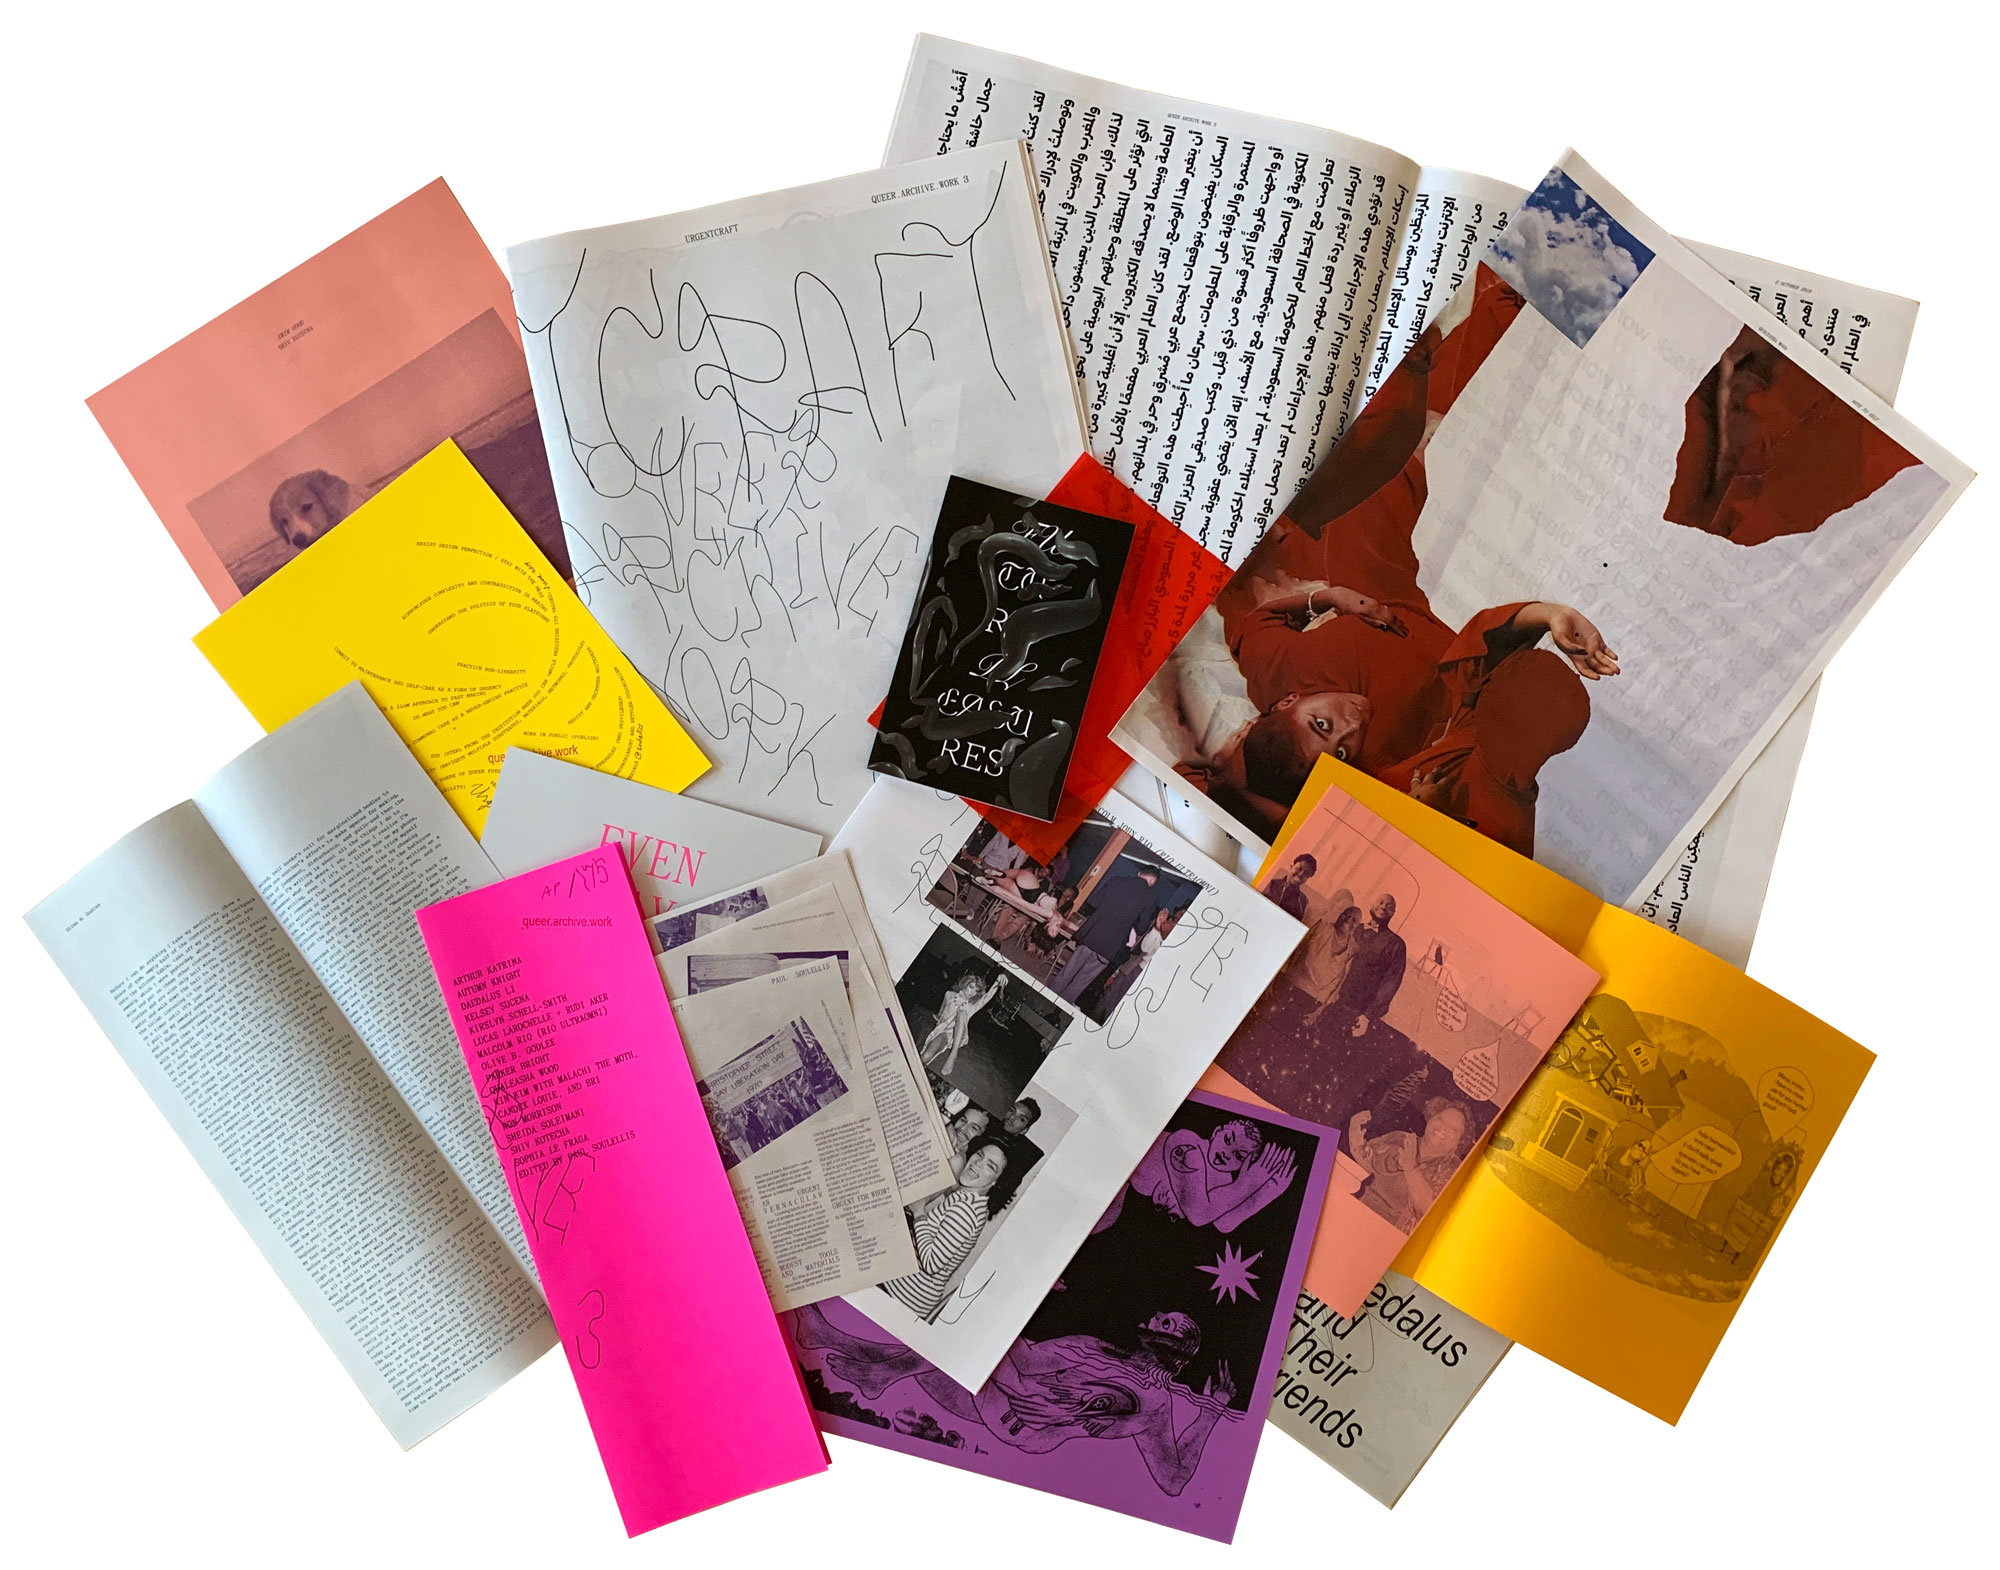 Queer Archive Work Publication